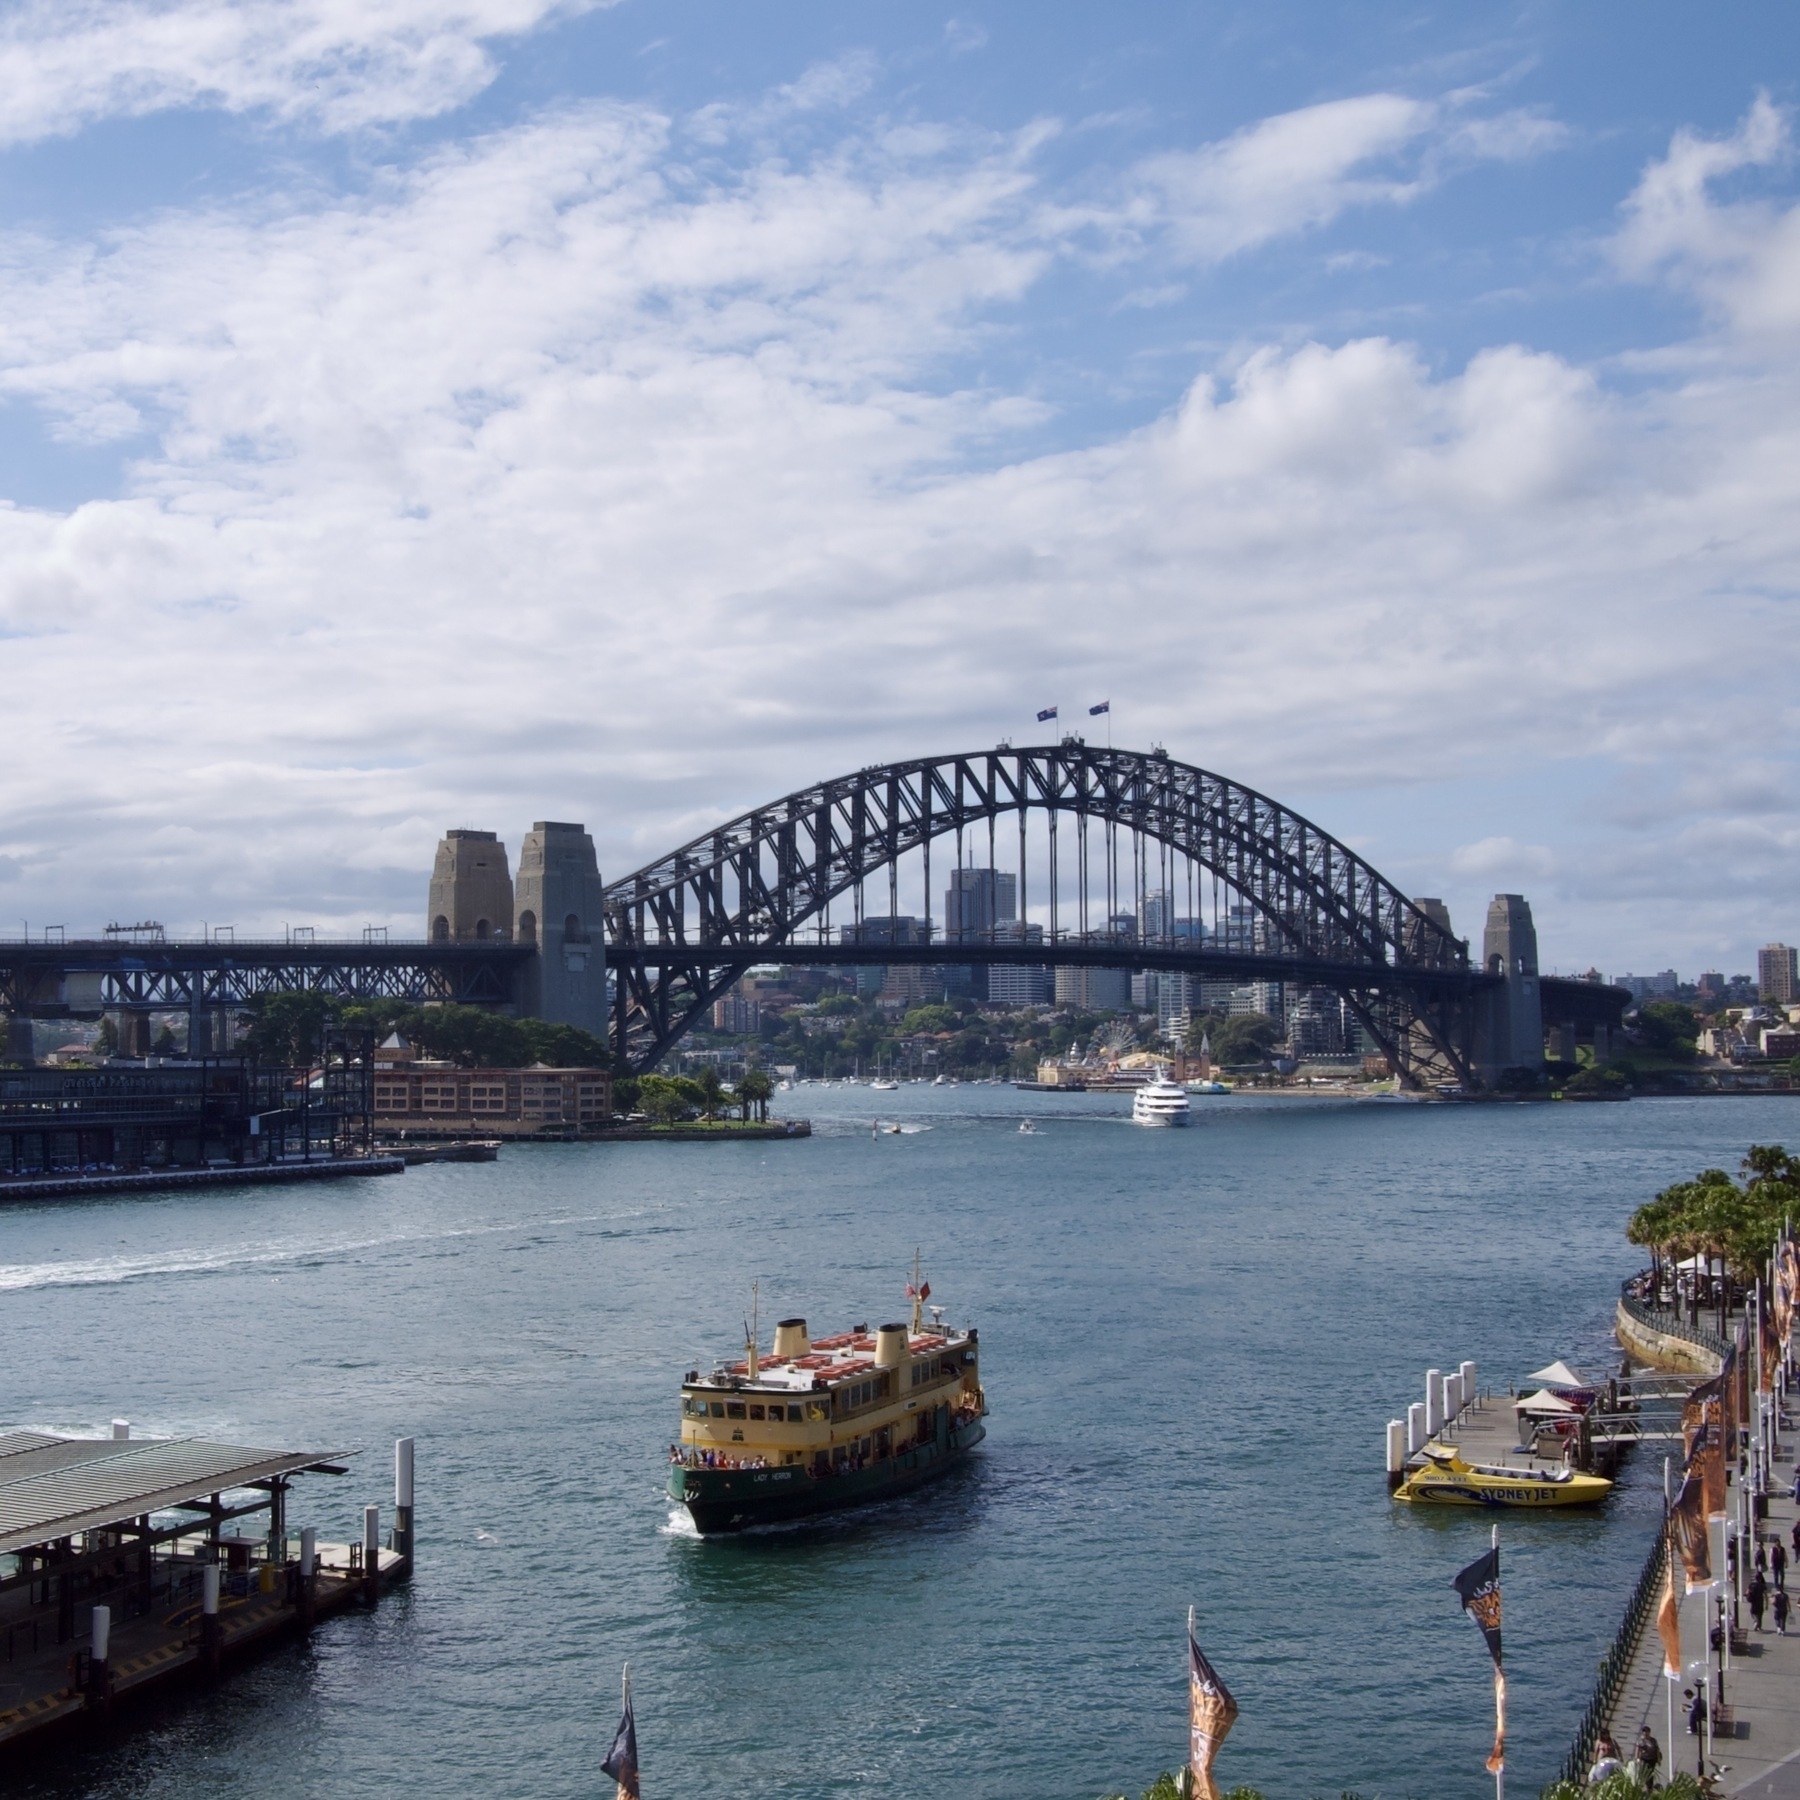 A boat in Circular Quay with the Sydney harbour bridge in the background.